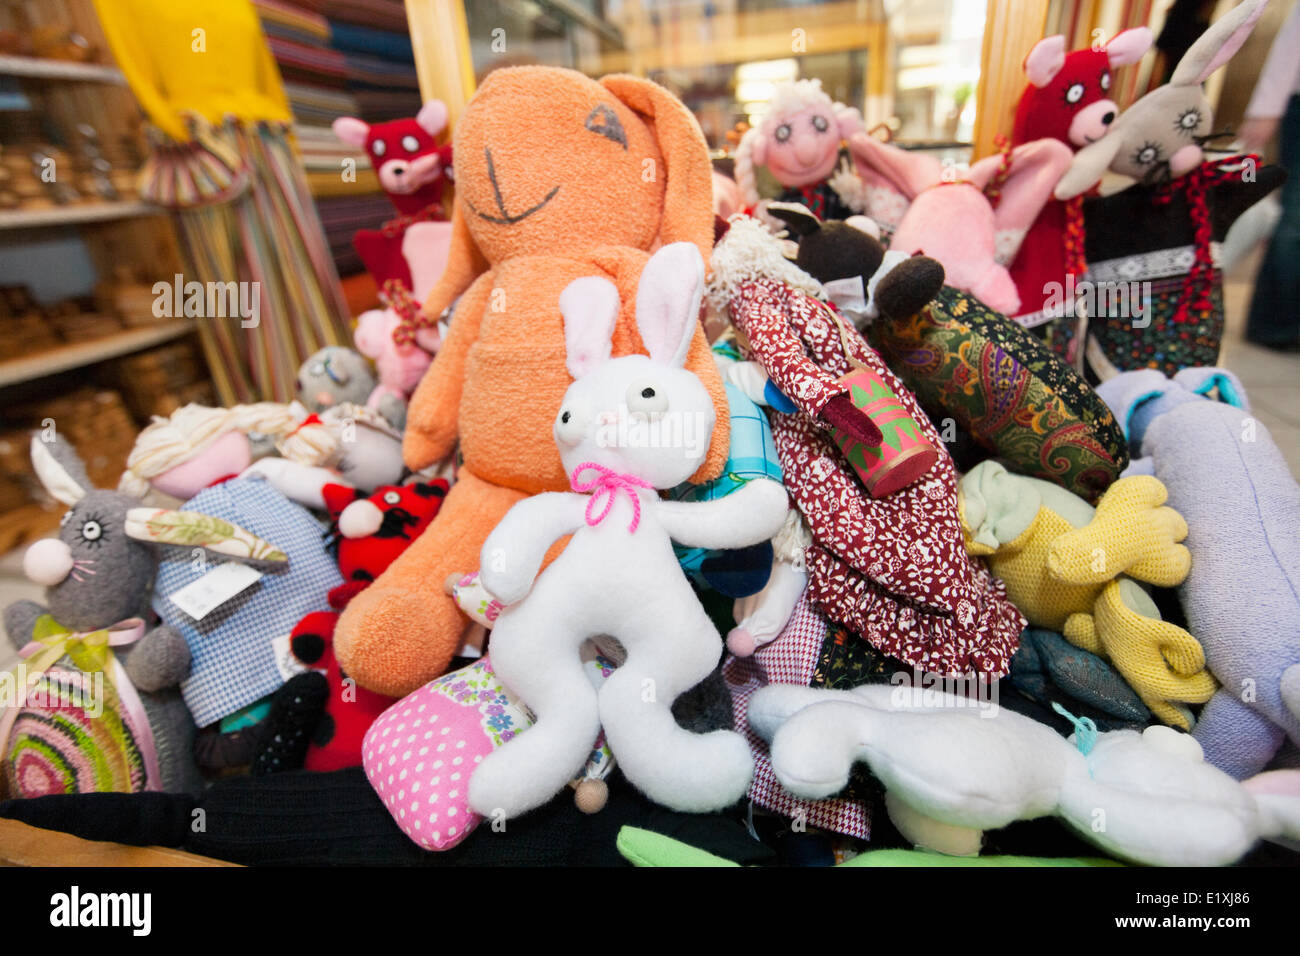 Heap of stuffed toys in gift store Stock Photo